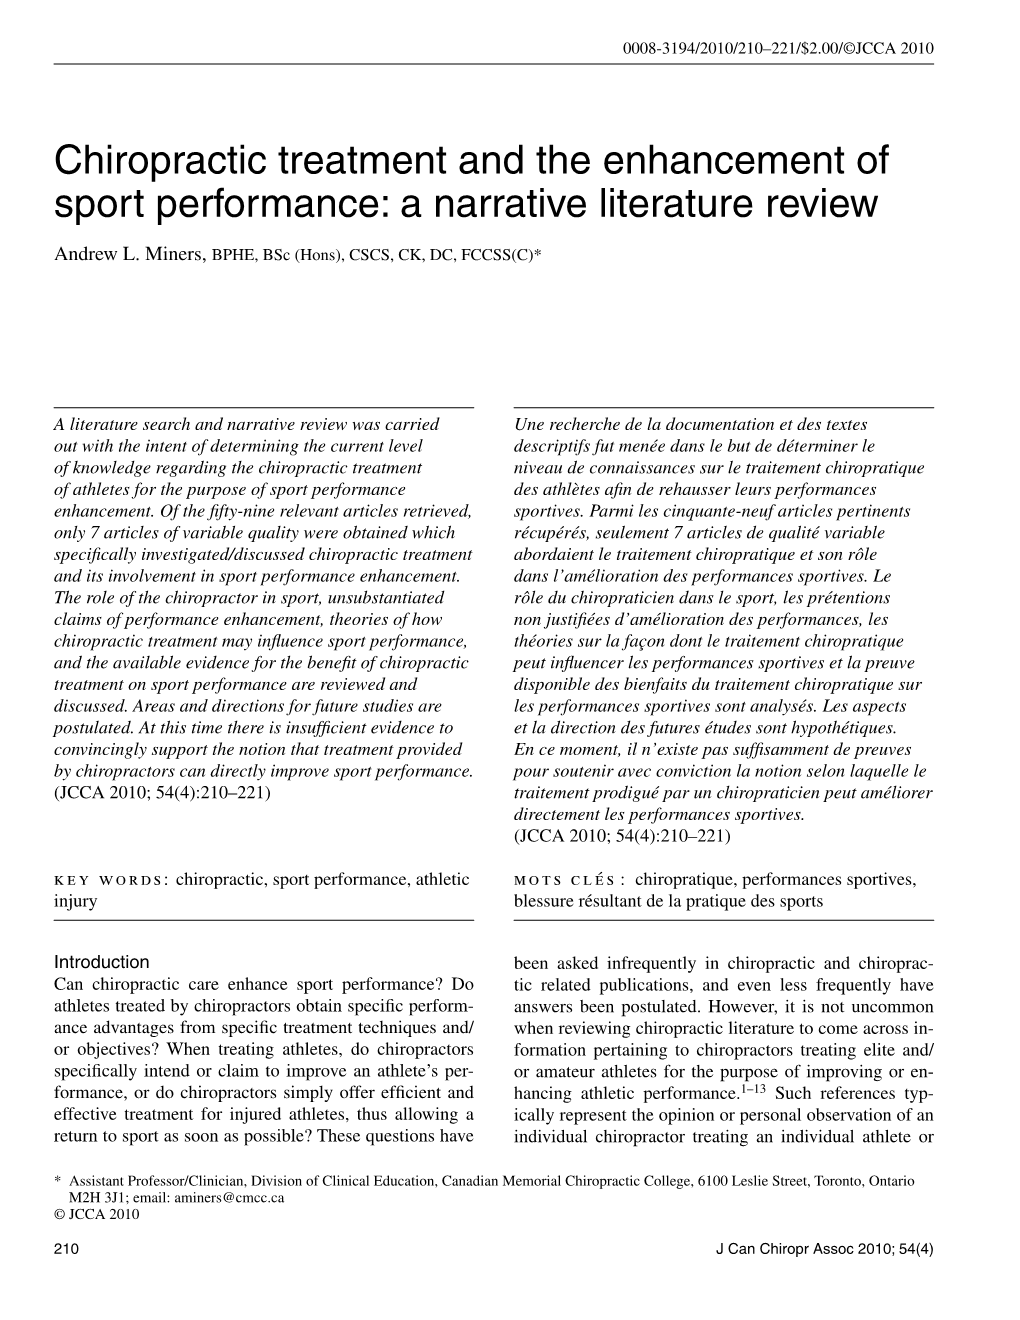 Chiropractic Treatment and the Enhancement of Sport Performance: a Narrative Literature Review